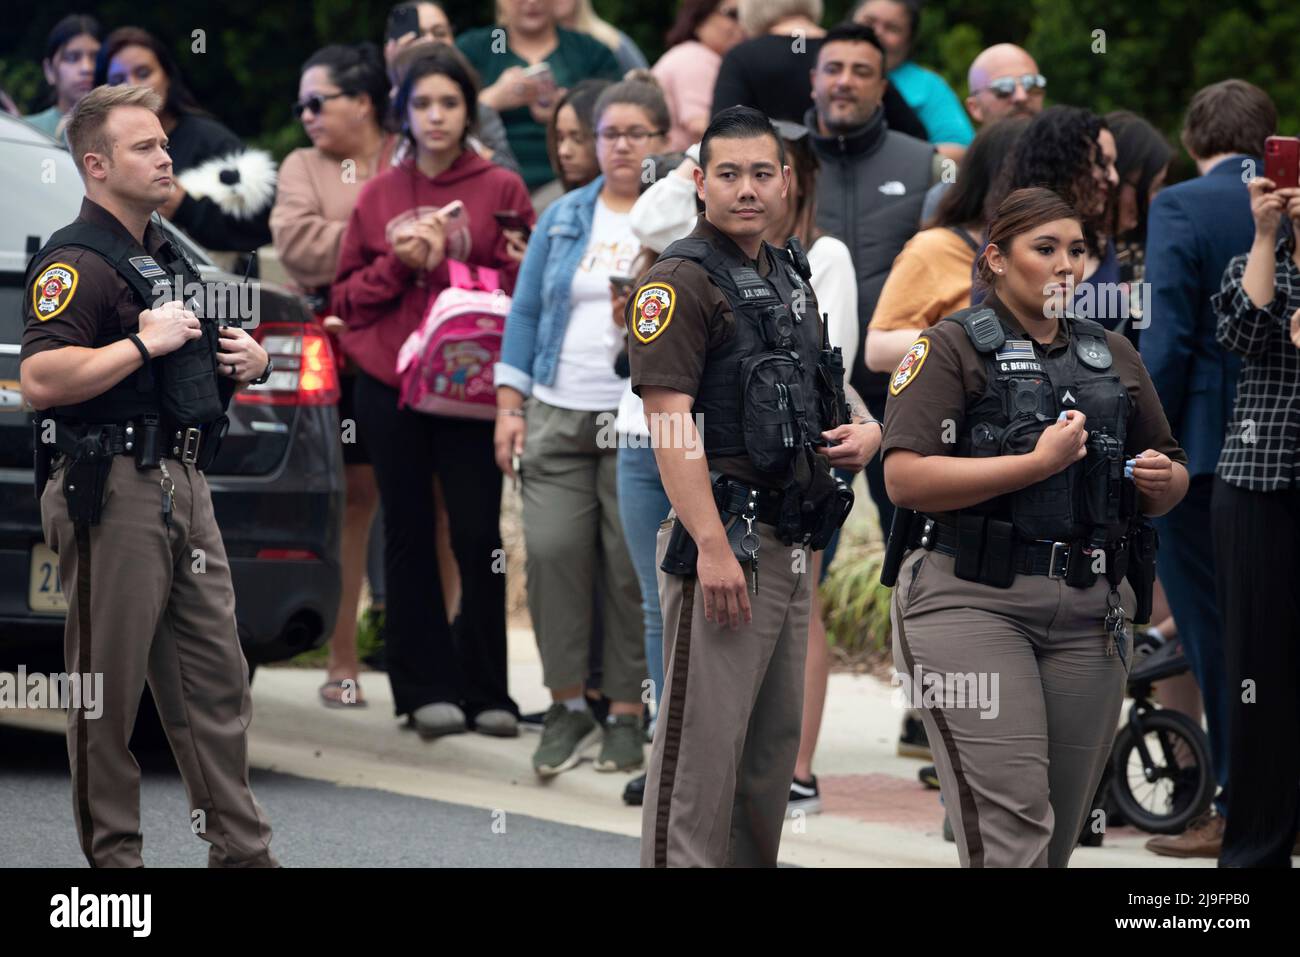 Fairfax County Sheriffs Deputies provide crowd control for Johnny Depp and Amber Heards departure from the Fairfax County Courthouse, in Fairfax, at the close of another day in his civil trial with Amber Heard, Thursday, May 5, 2022. Depp brought a defamation lawsuit against his former wife, actress Amber Heard, after she wrote an op-ed in The Washington Post in 2018 that, without naming Depp, accused him of domestic abuse. Credit: Cliff Owen/CNP (RESTRICTION: NO New York or New Jersey Newspapers or newspapers within a 75 mile radius of New York City) Stock Photo